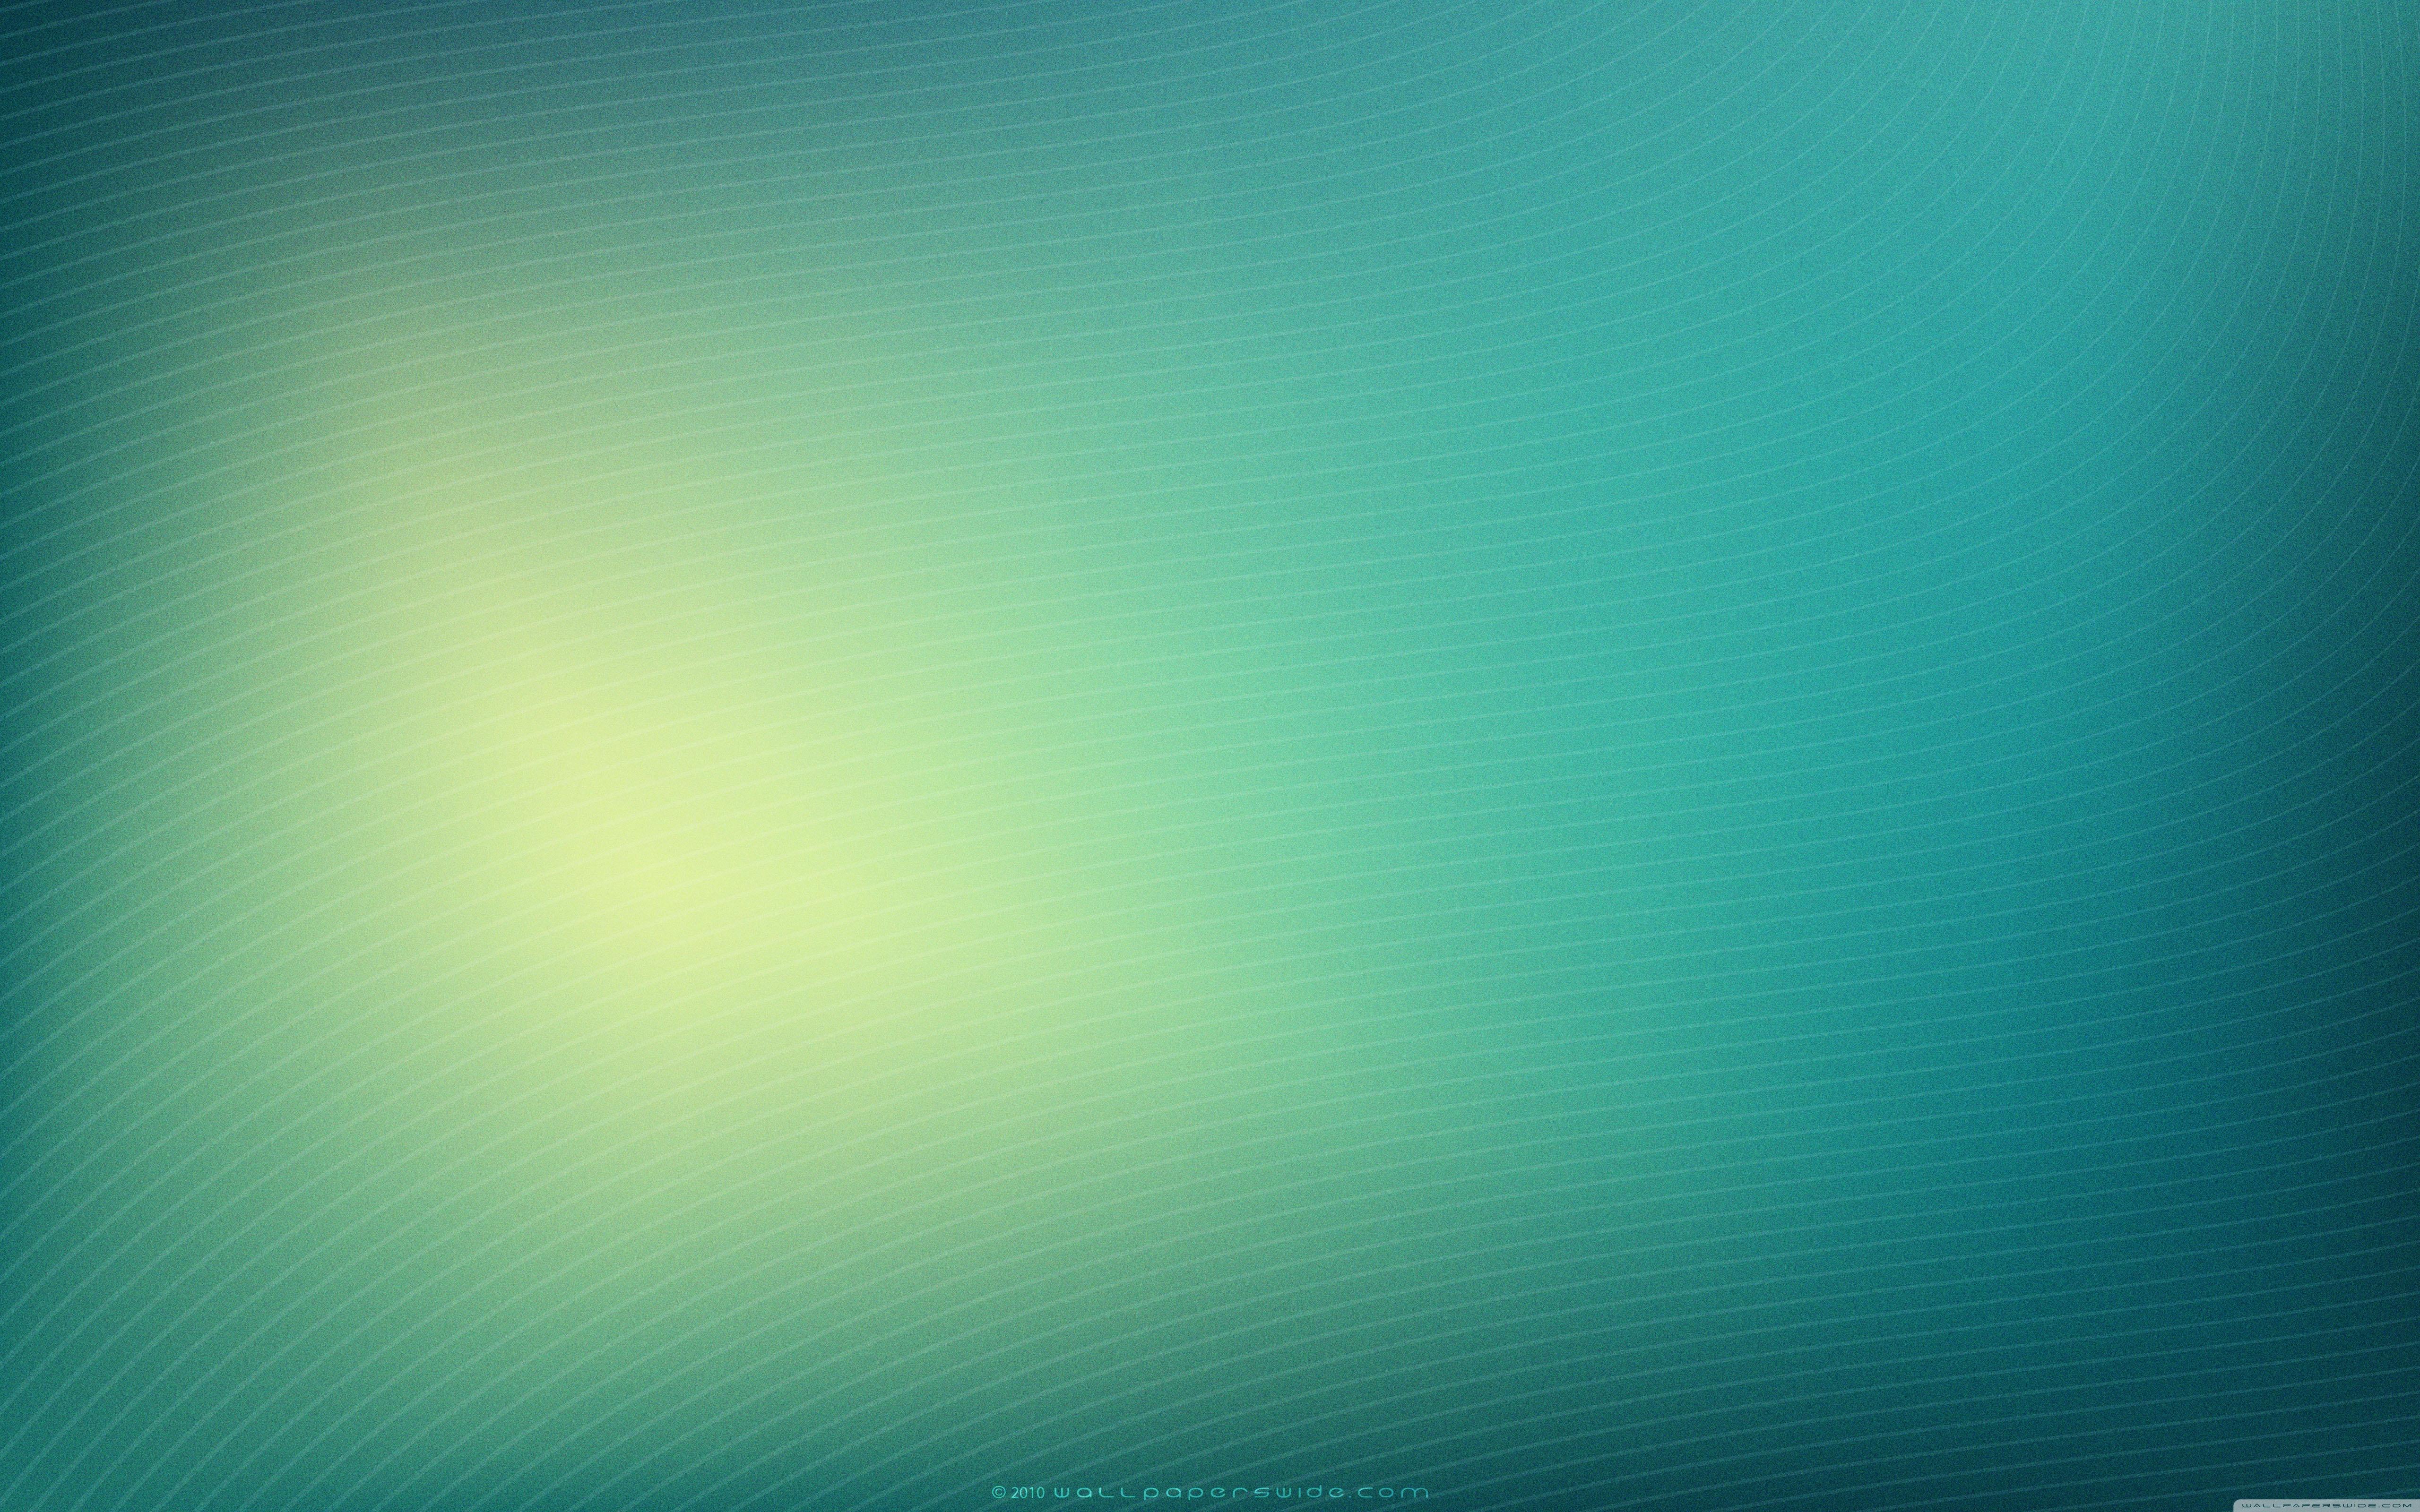 early, Morning, Abstract wallpapers 5120x3200 Wallpapers HD / Desktop